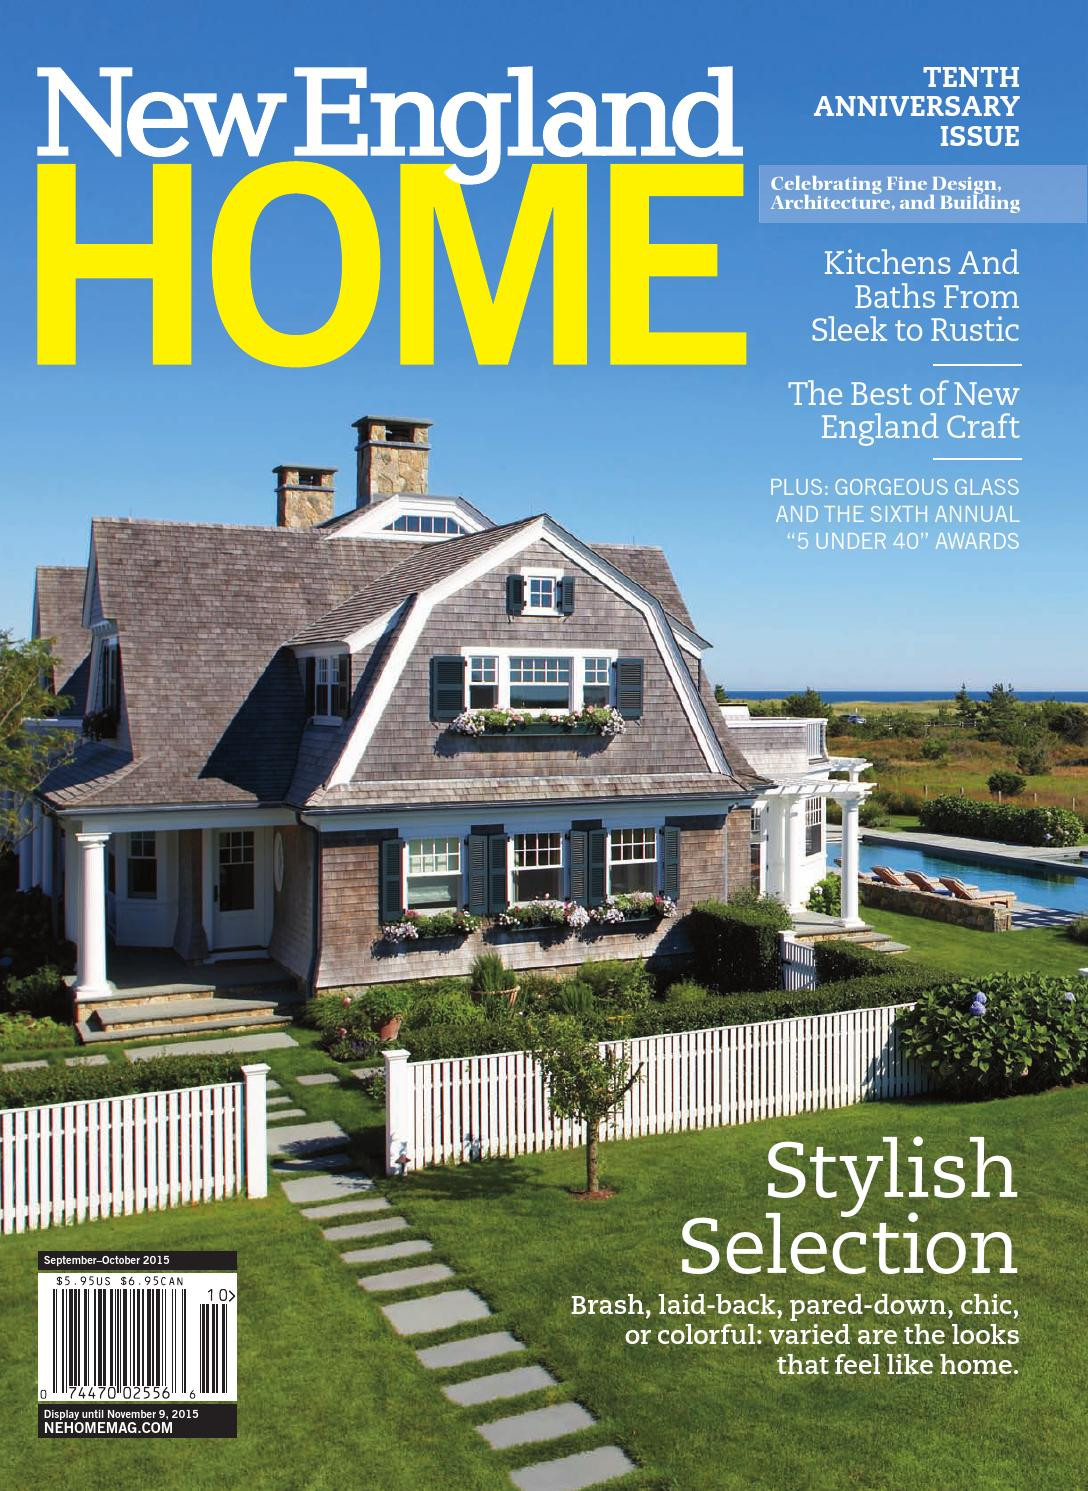 13 Best Hardwood Floor Refinishing Falmouth Ma 2024 free download hardwood floor refinishing falmouth ma of new england home september october 2015 by new england home magazine throughout new england home september october 2015 by new england home magazine